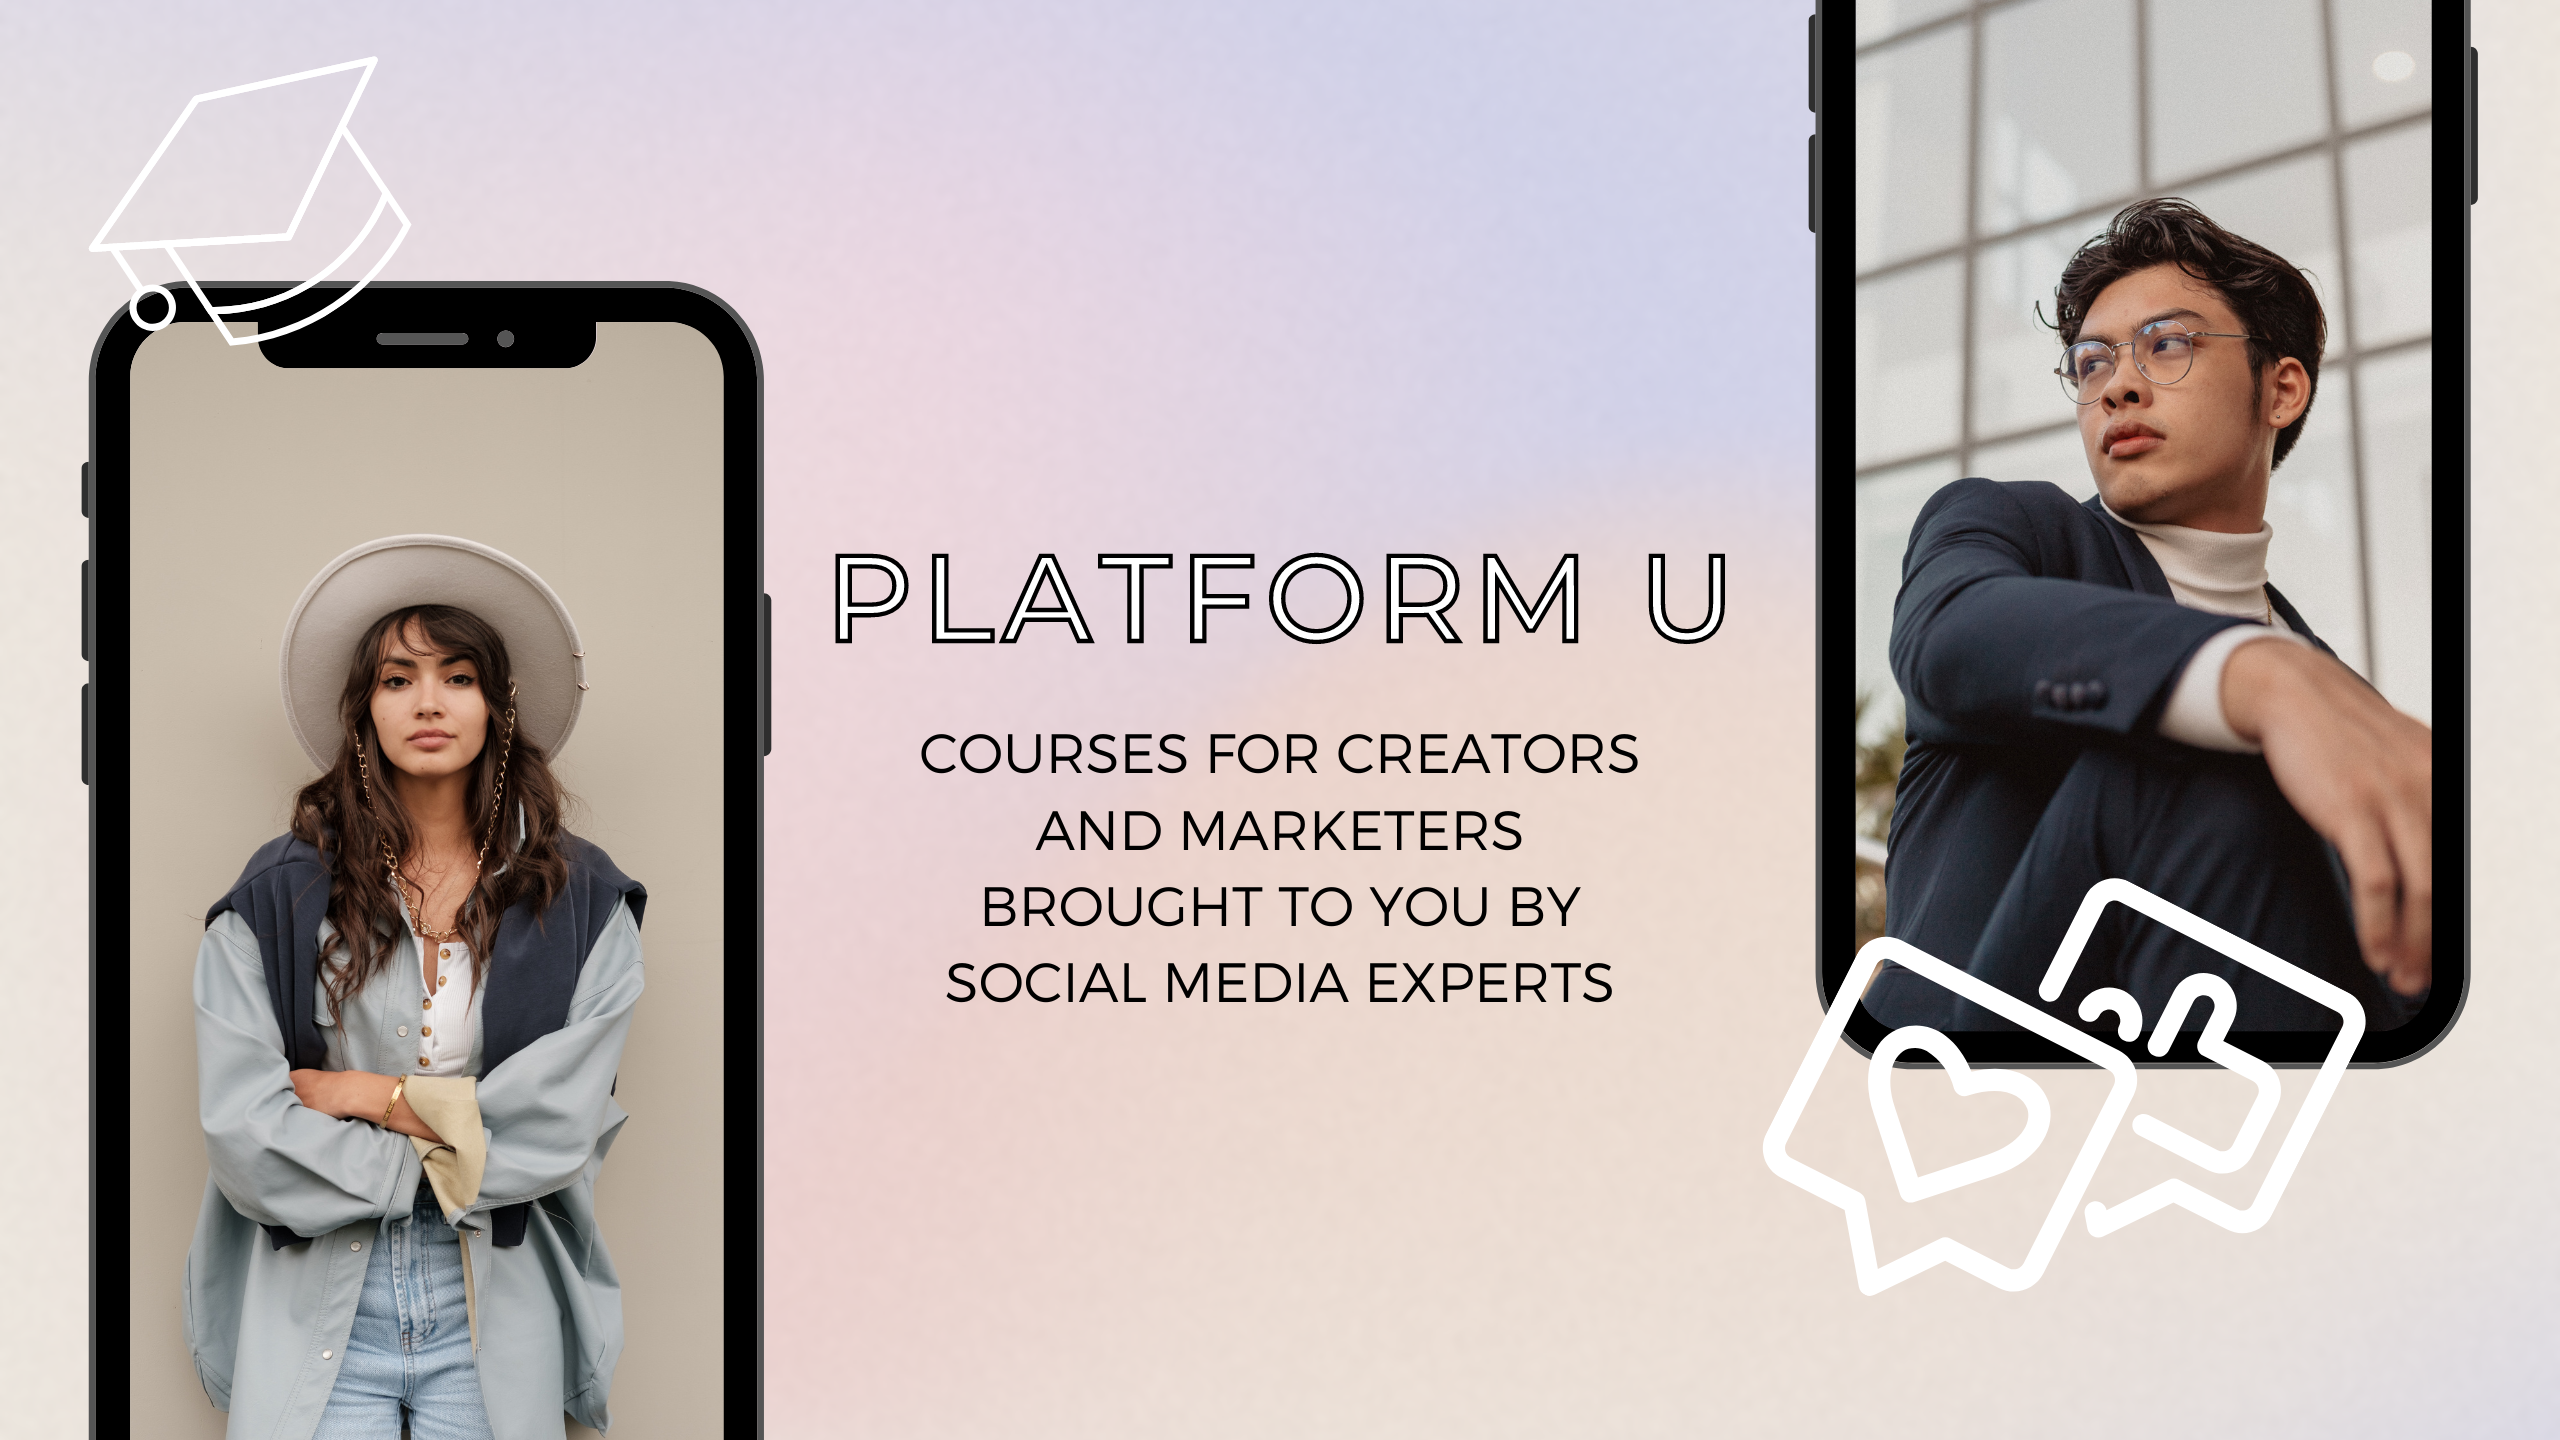 Courses for Creators and Marketers